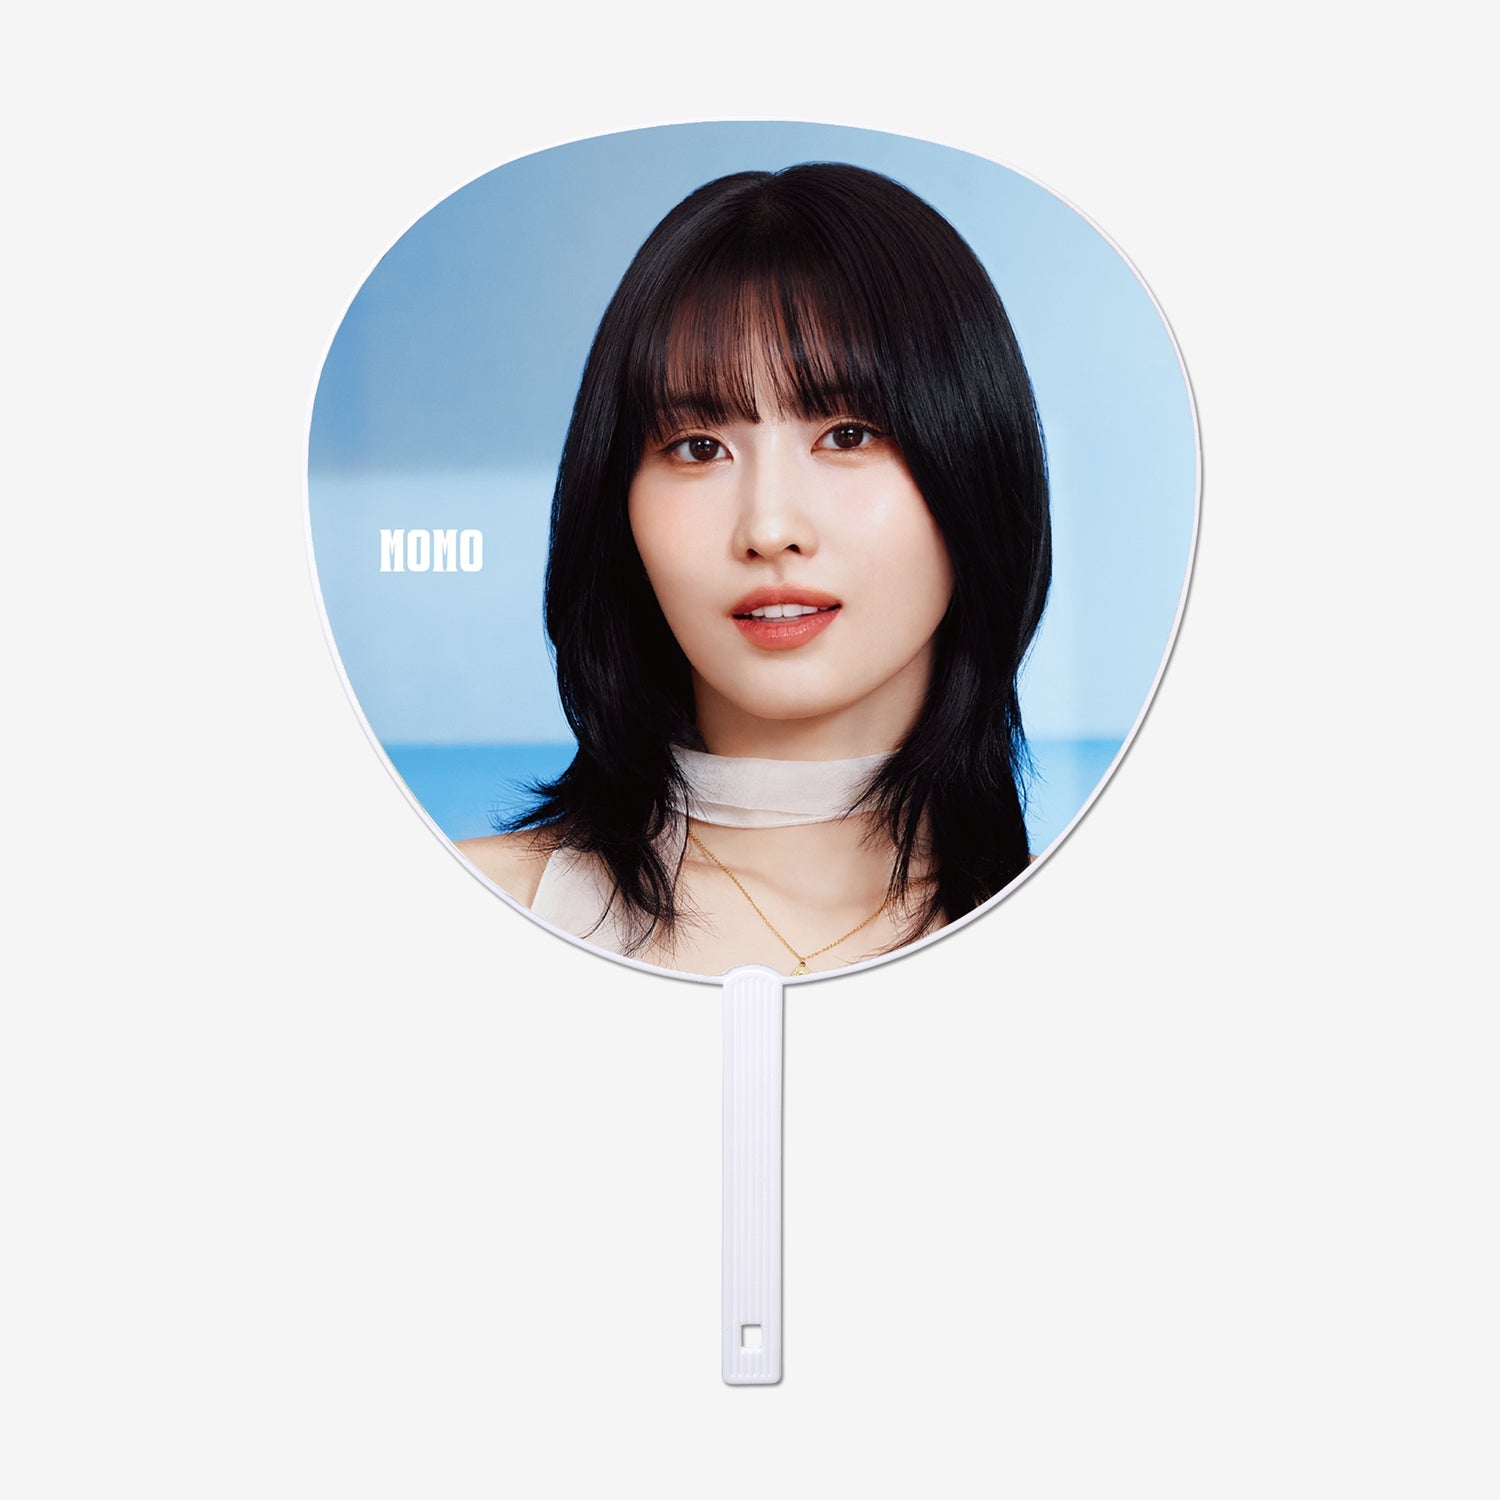 IMAGE PICKET - MOMO【SPECIAL】/ TWICE『READY TO BE SPECIAL』